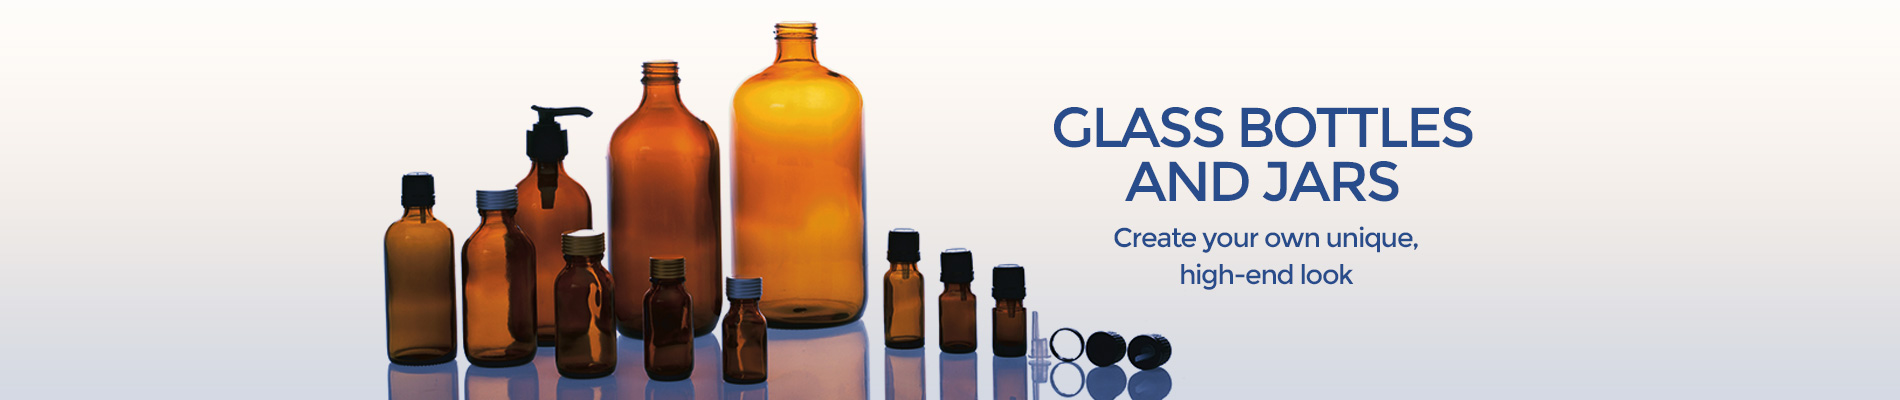 Glass Bottles & Jars from New Directions Aromatics